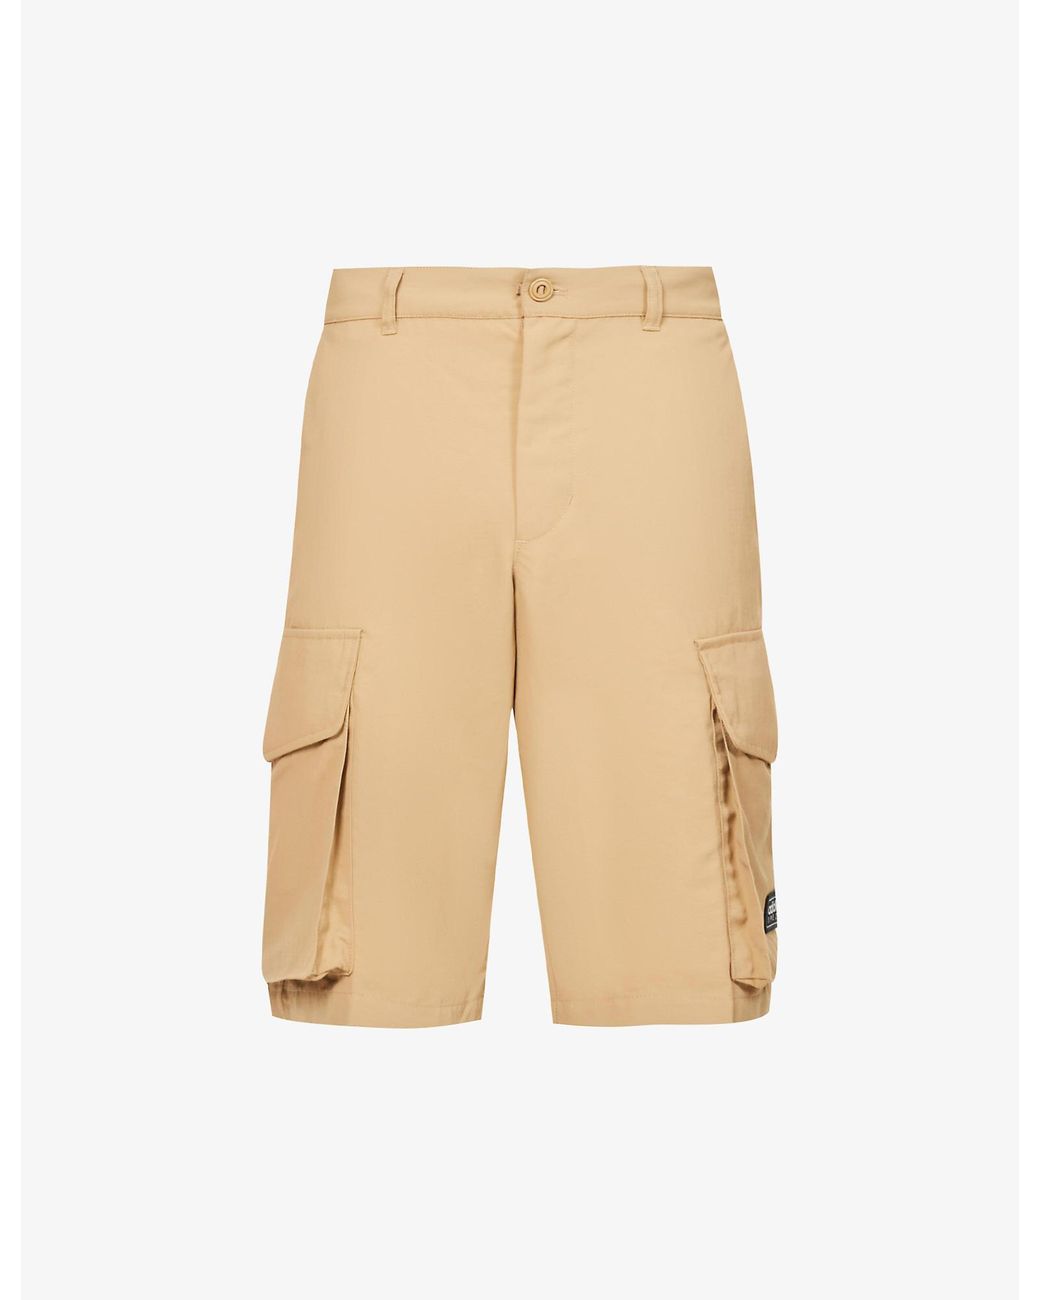 adidas Originals Synthetic Adidas Spezial Portinatx Brand-appliqué Shell  Shorts in Natural for Men | Lyst